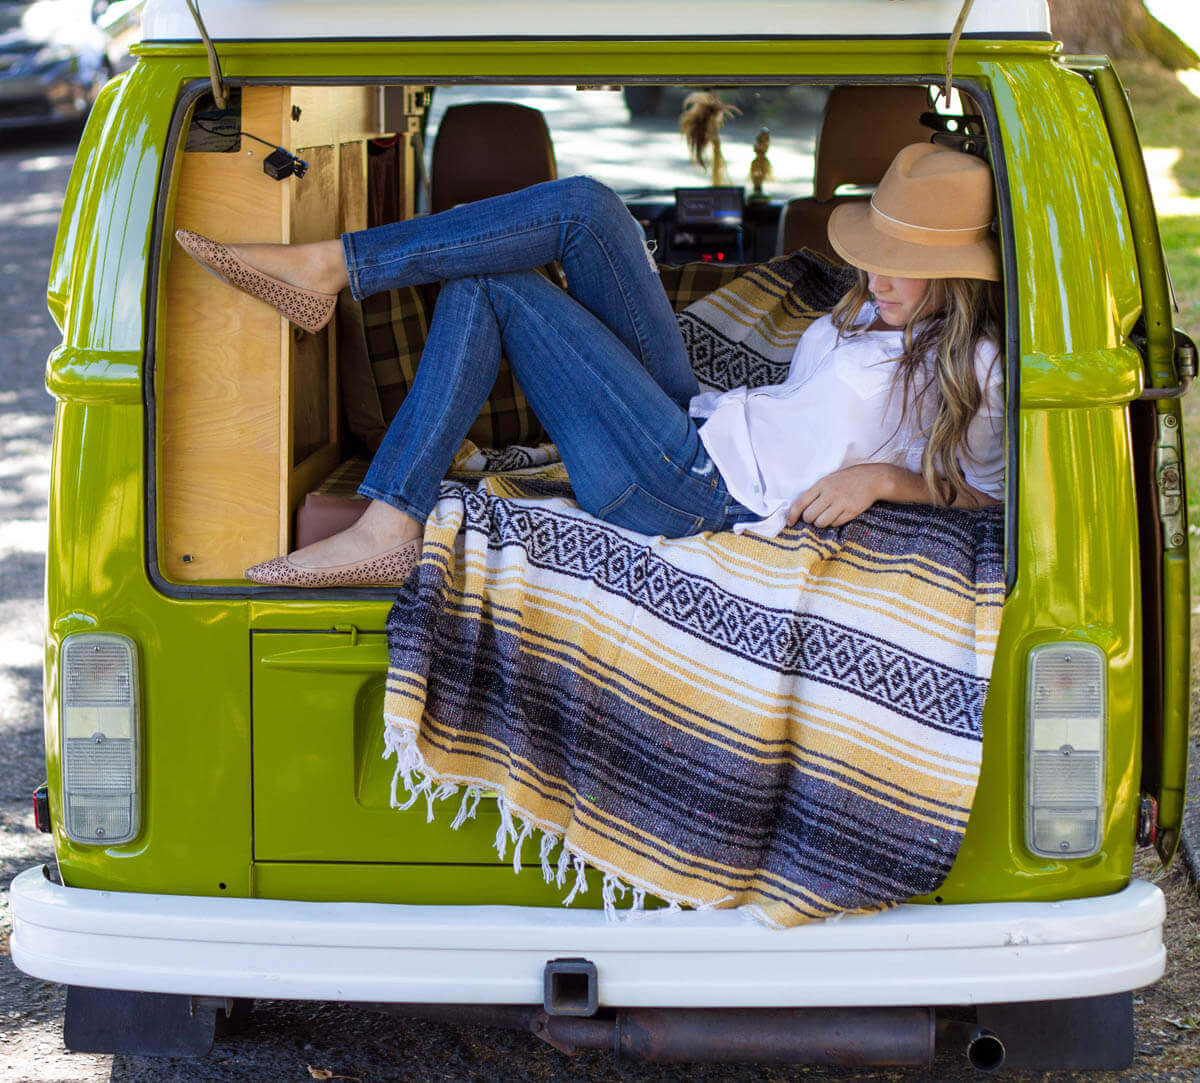 Female in hat lounges in back of lime-green VW van